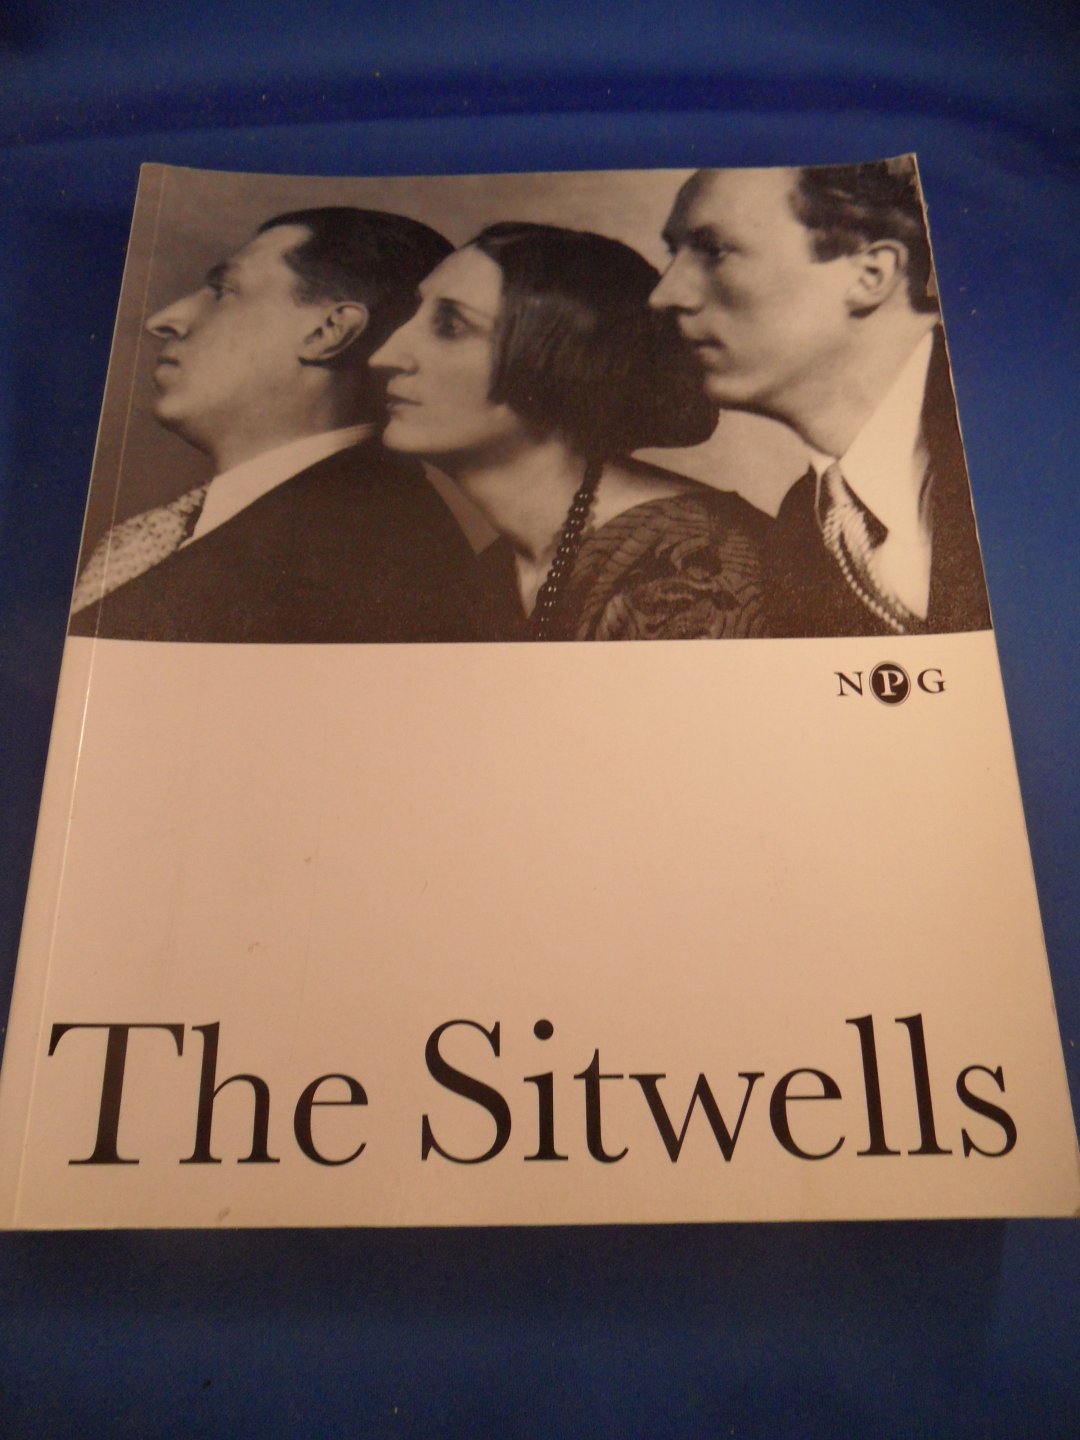 Skipwith, Joanna - The Sitwells and the Arts of the 1920s and 1930s